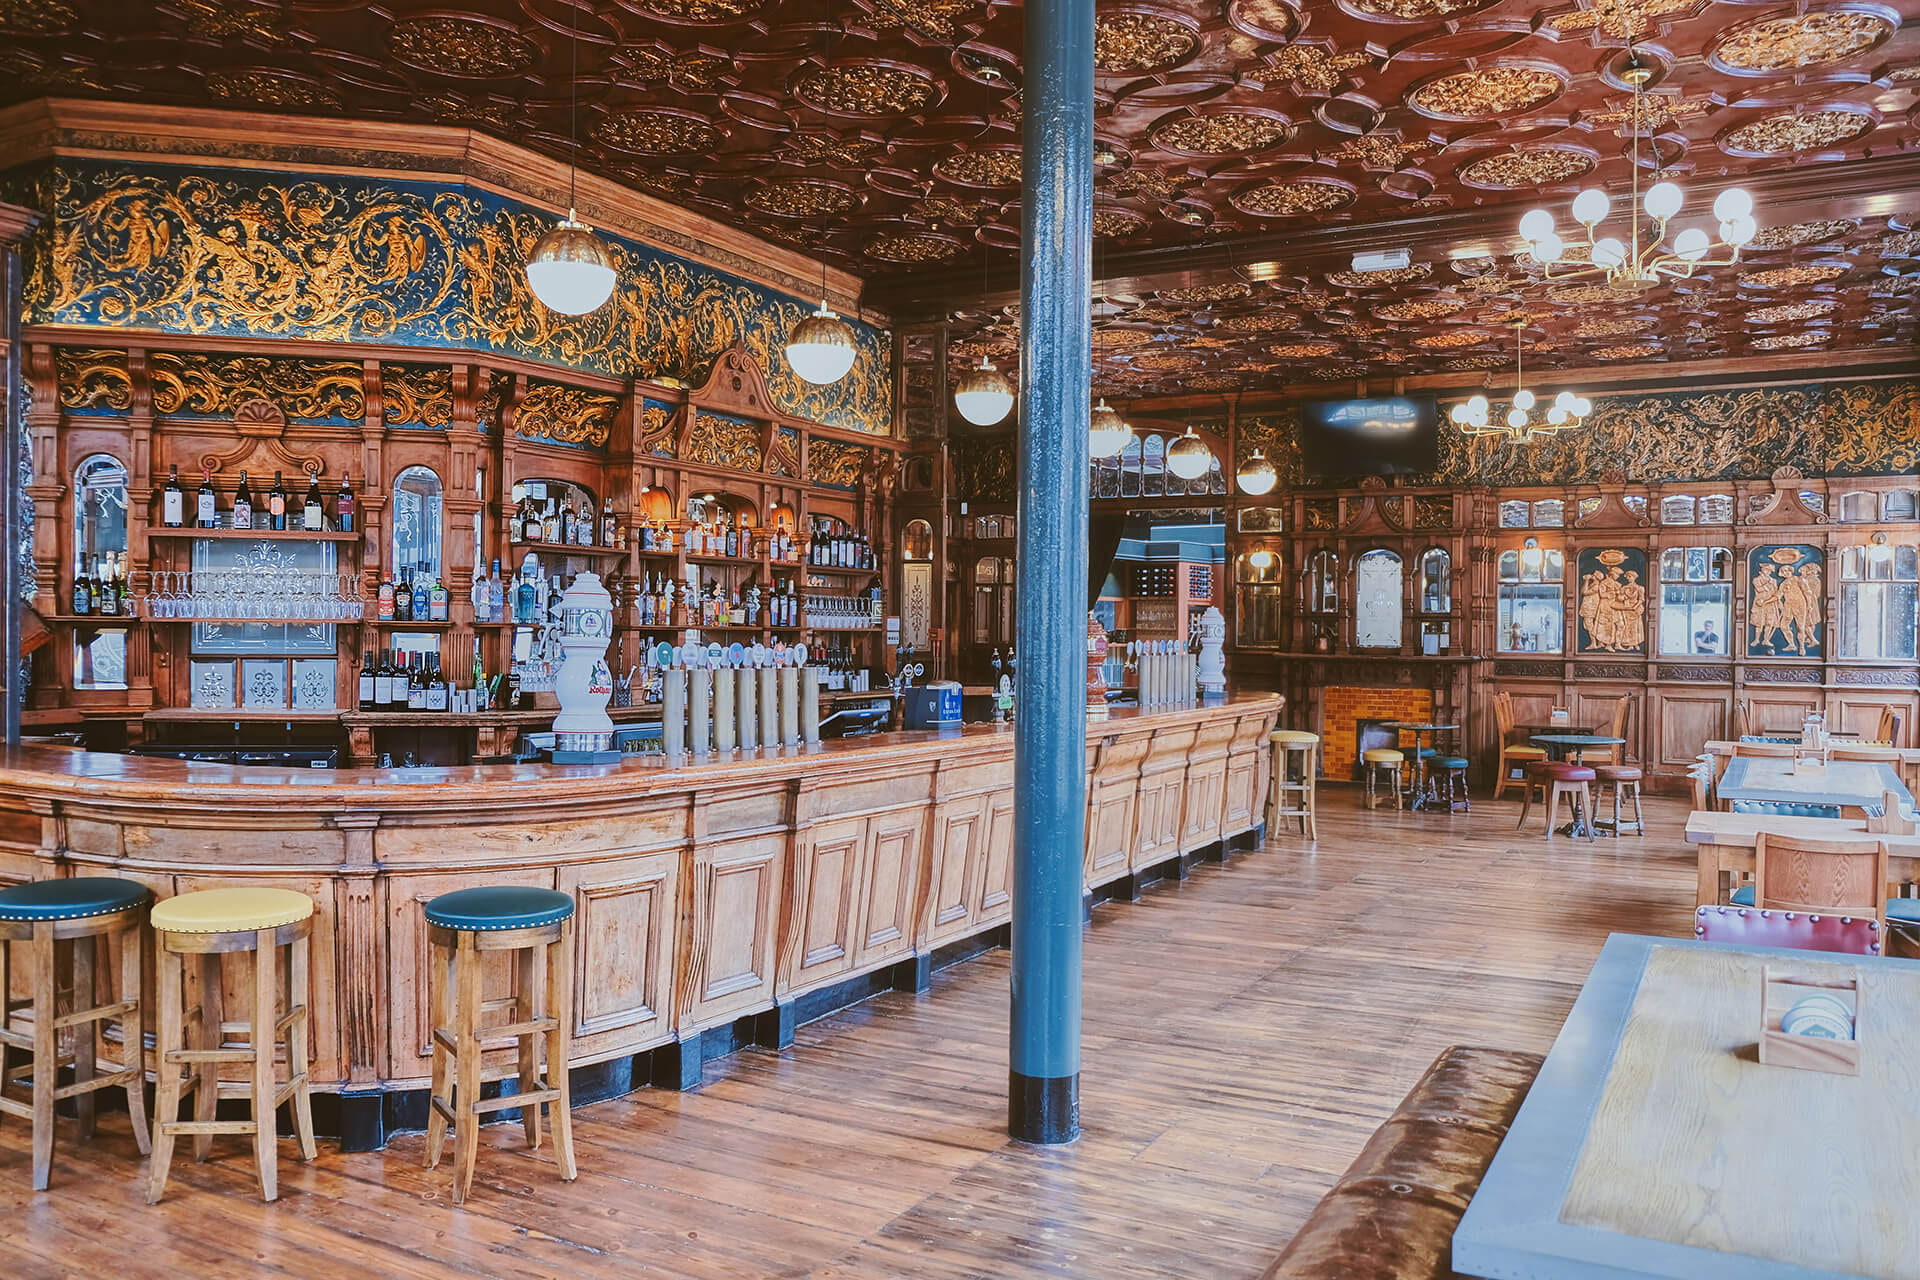 Four of the country's most beautiful pubs are in London